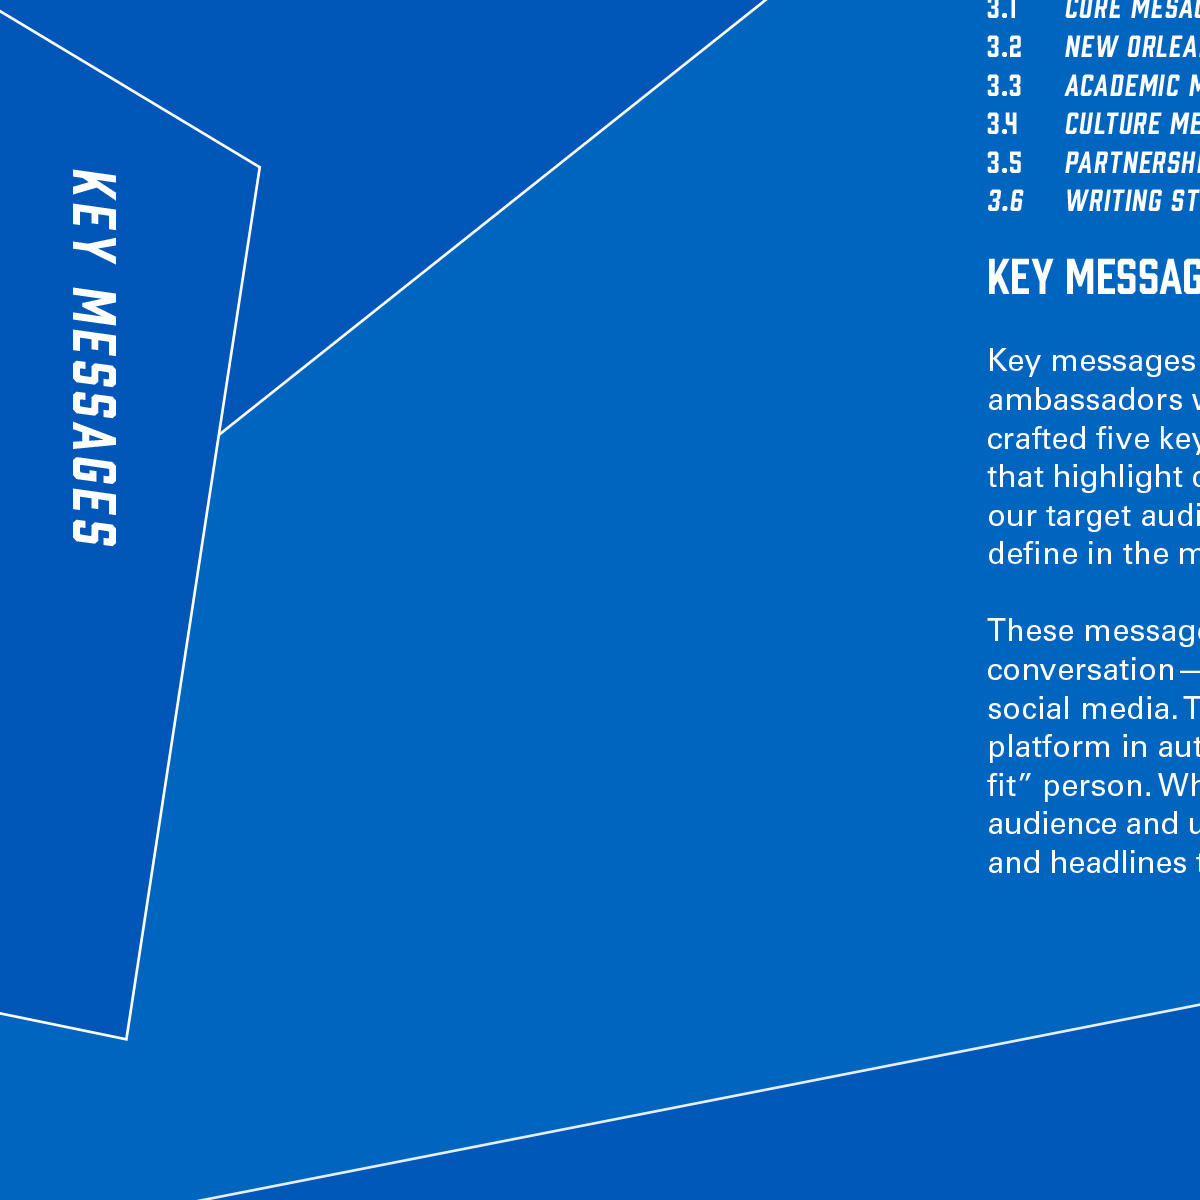 Cover page from brand guide. Image text: Key messages.